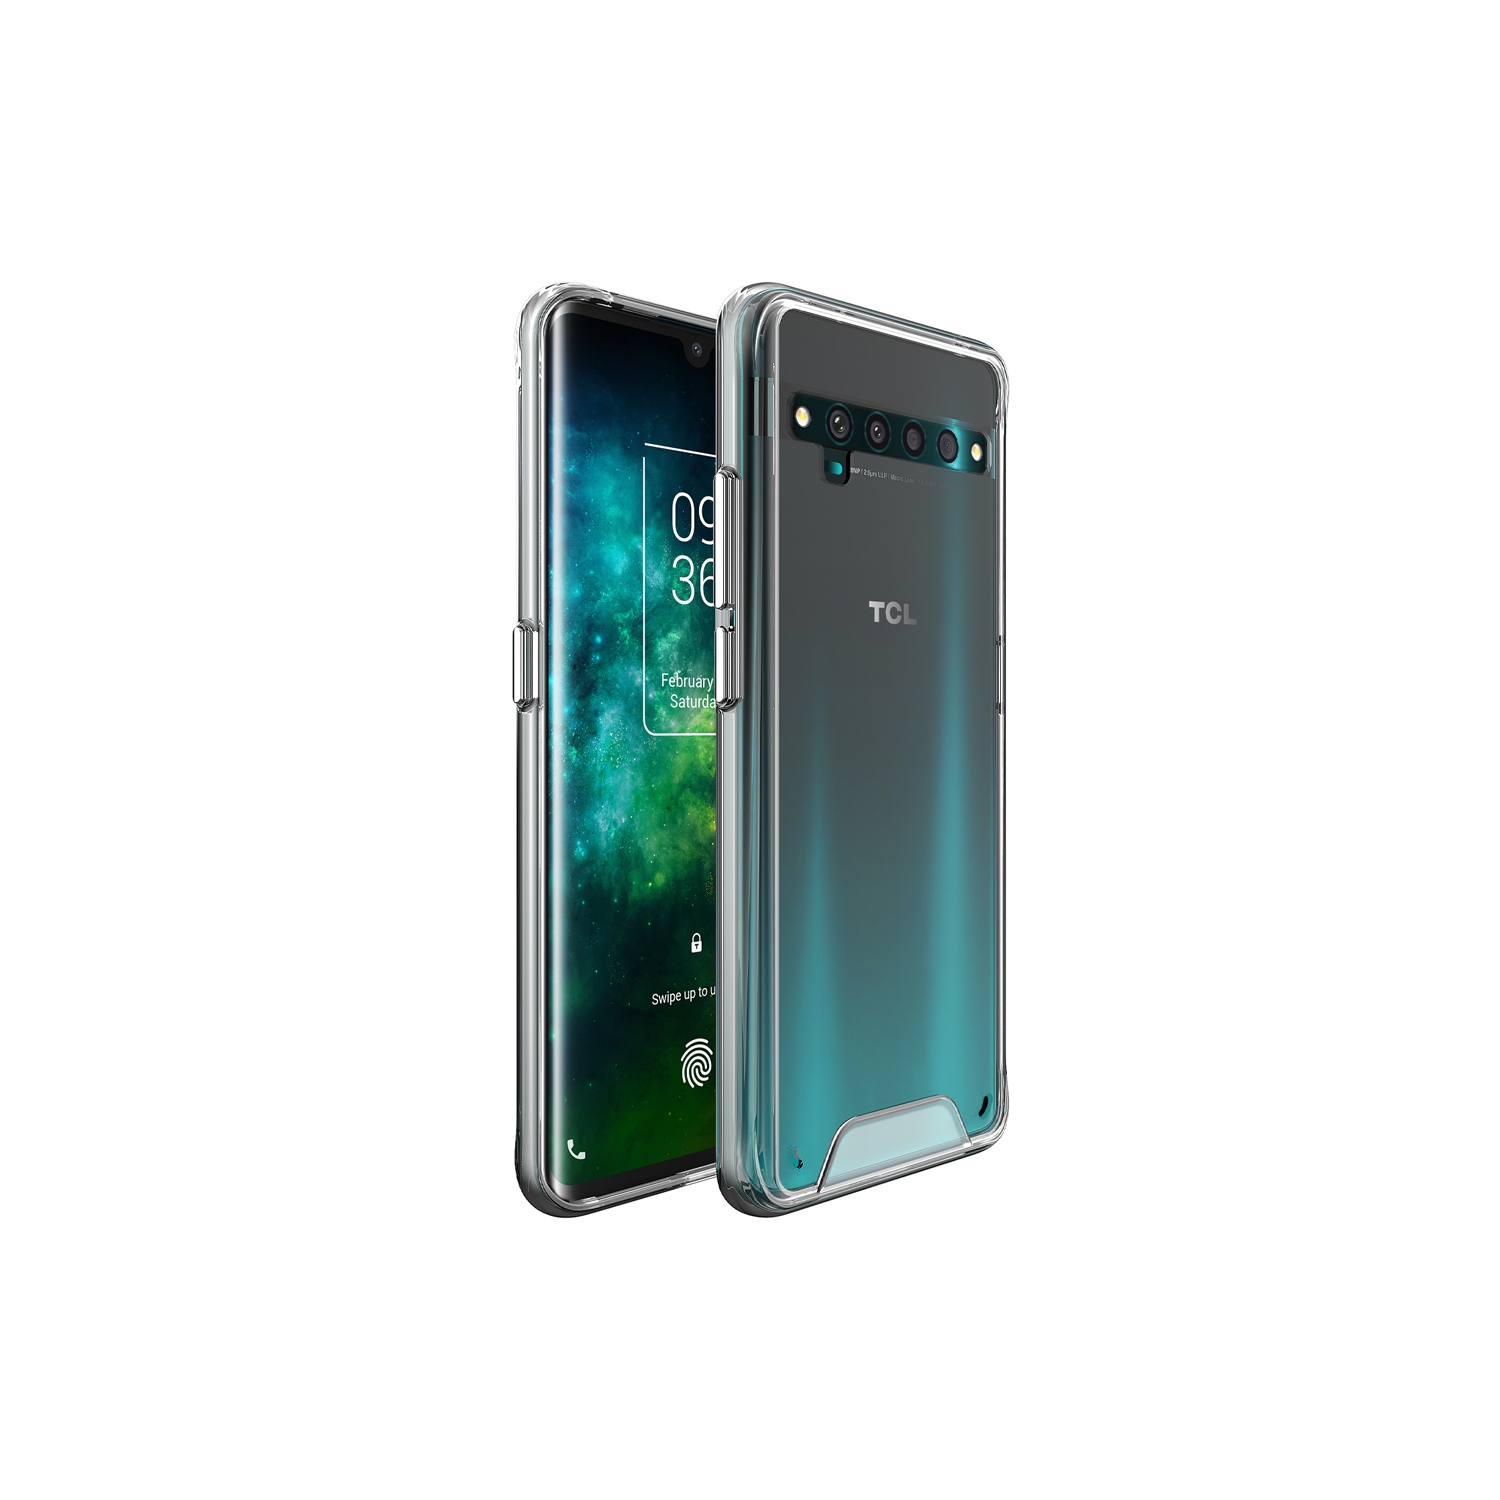 【CSmart】 Ultra Thin Soft TPU Silicone Jelly Bumper Back Cover Case for TCL 10 Pro, Transparent Clear